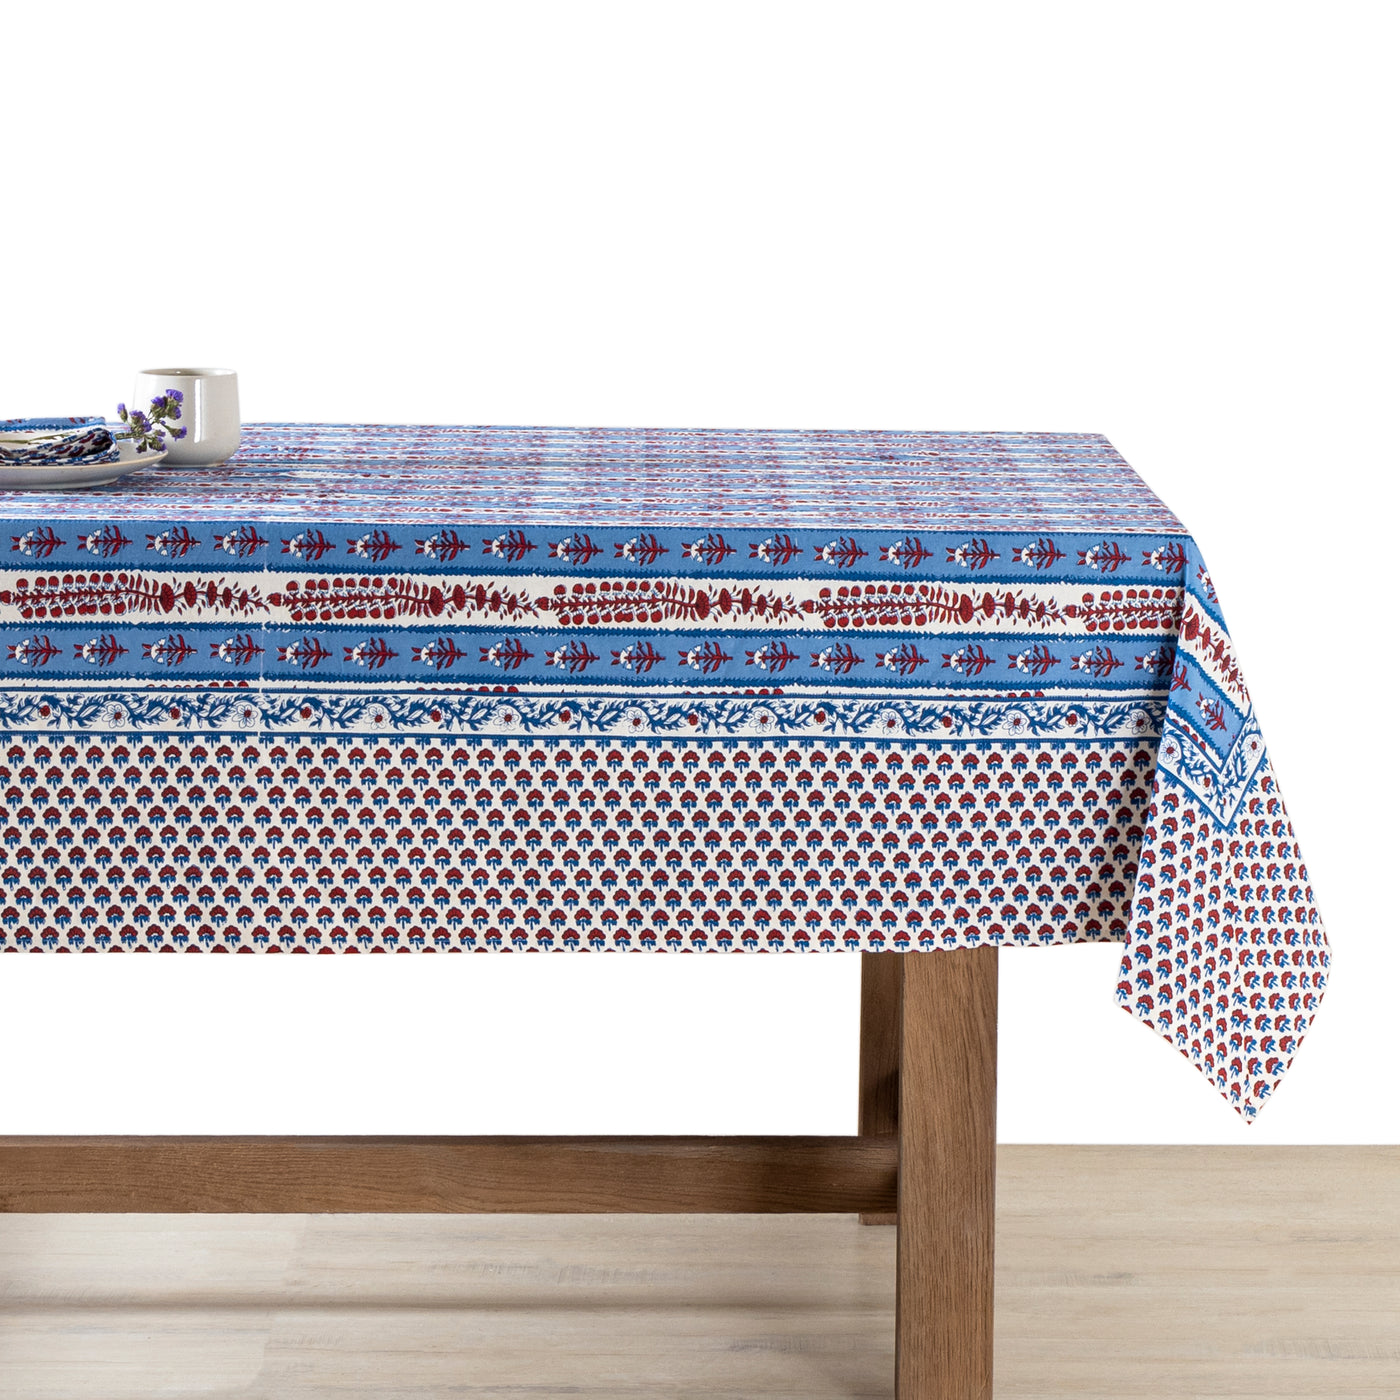 French Tablecloth Avignon Red & Blue